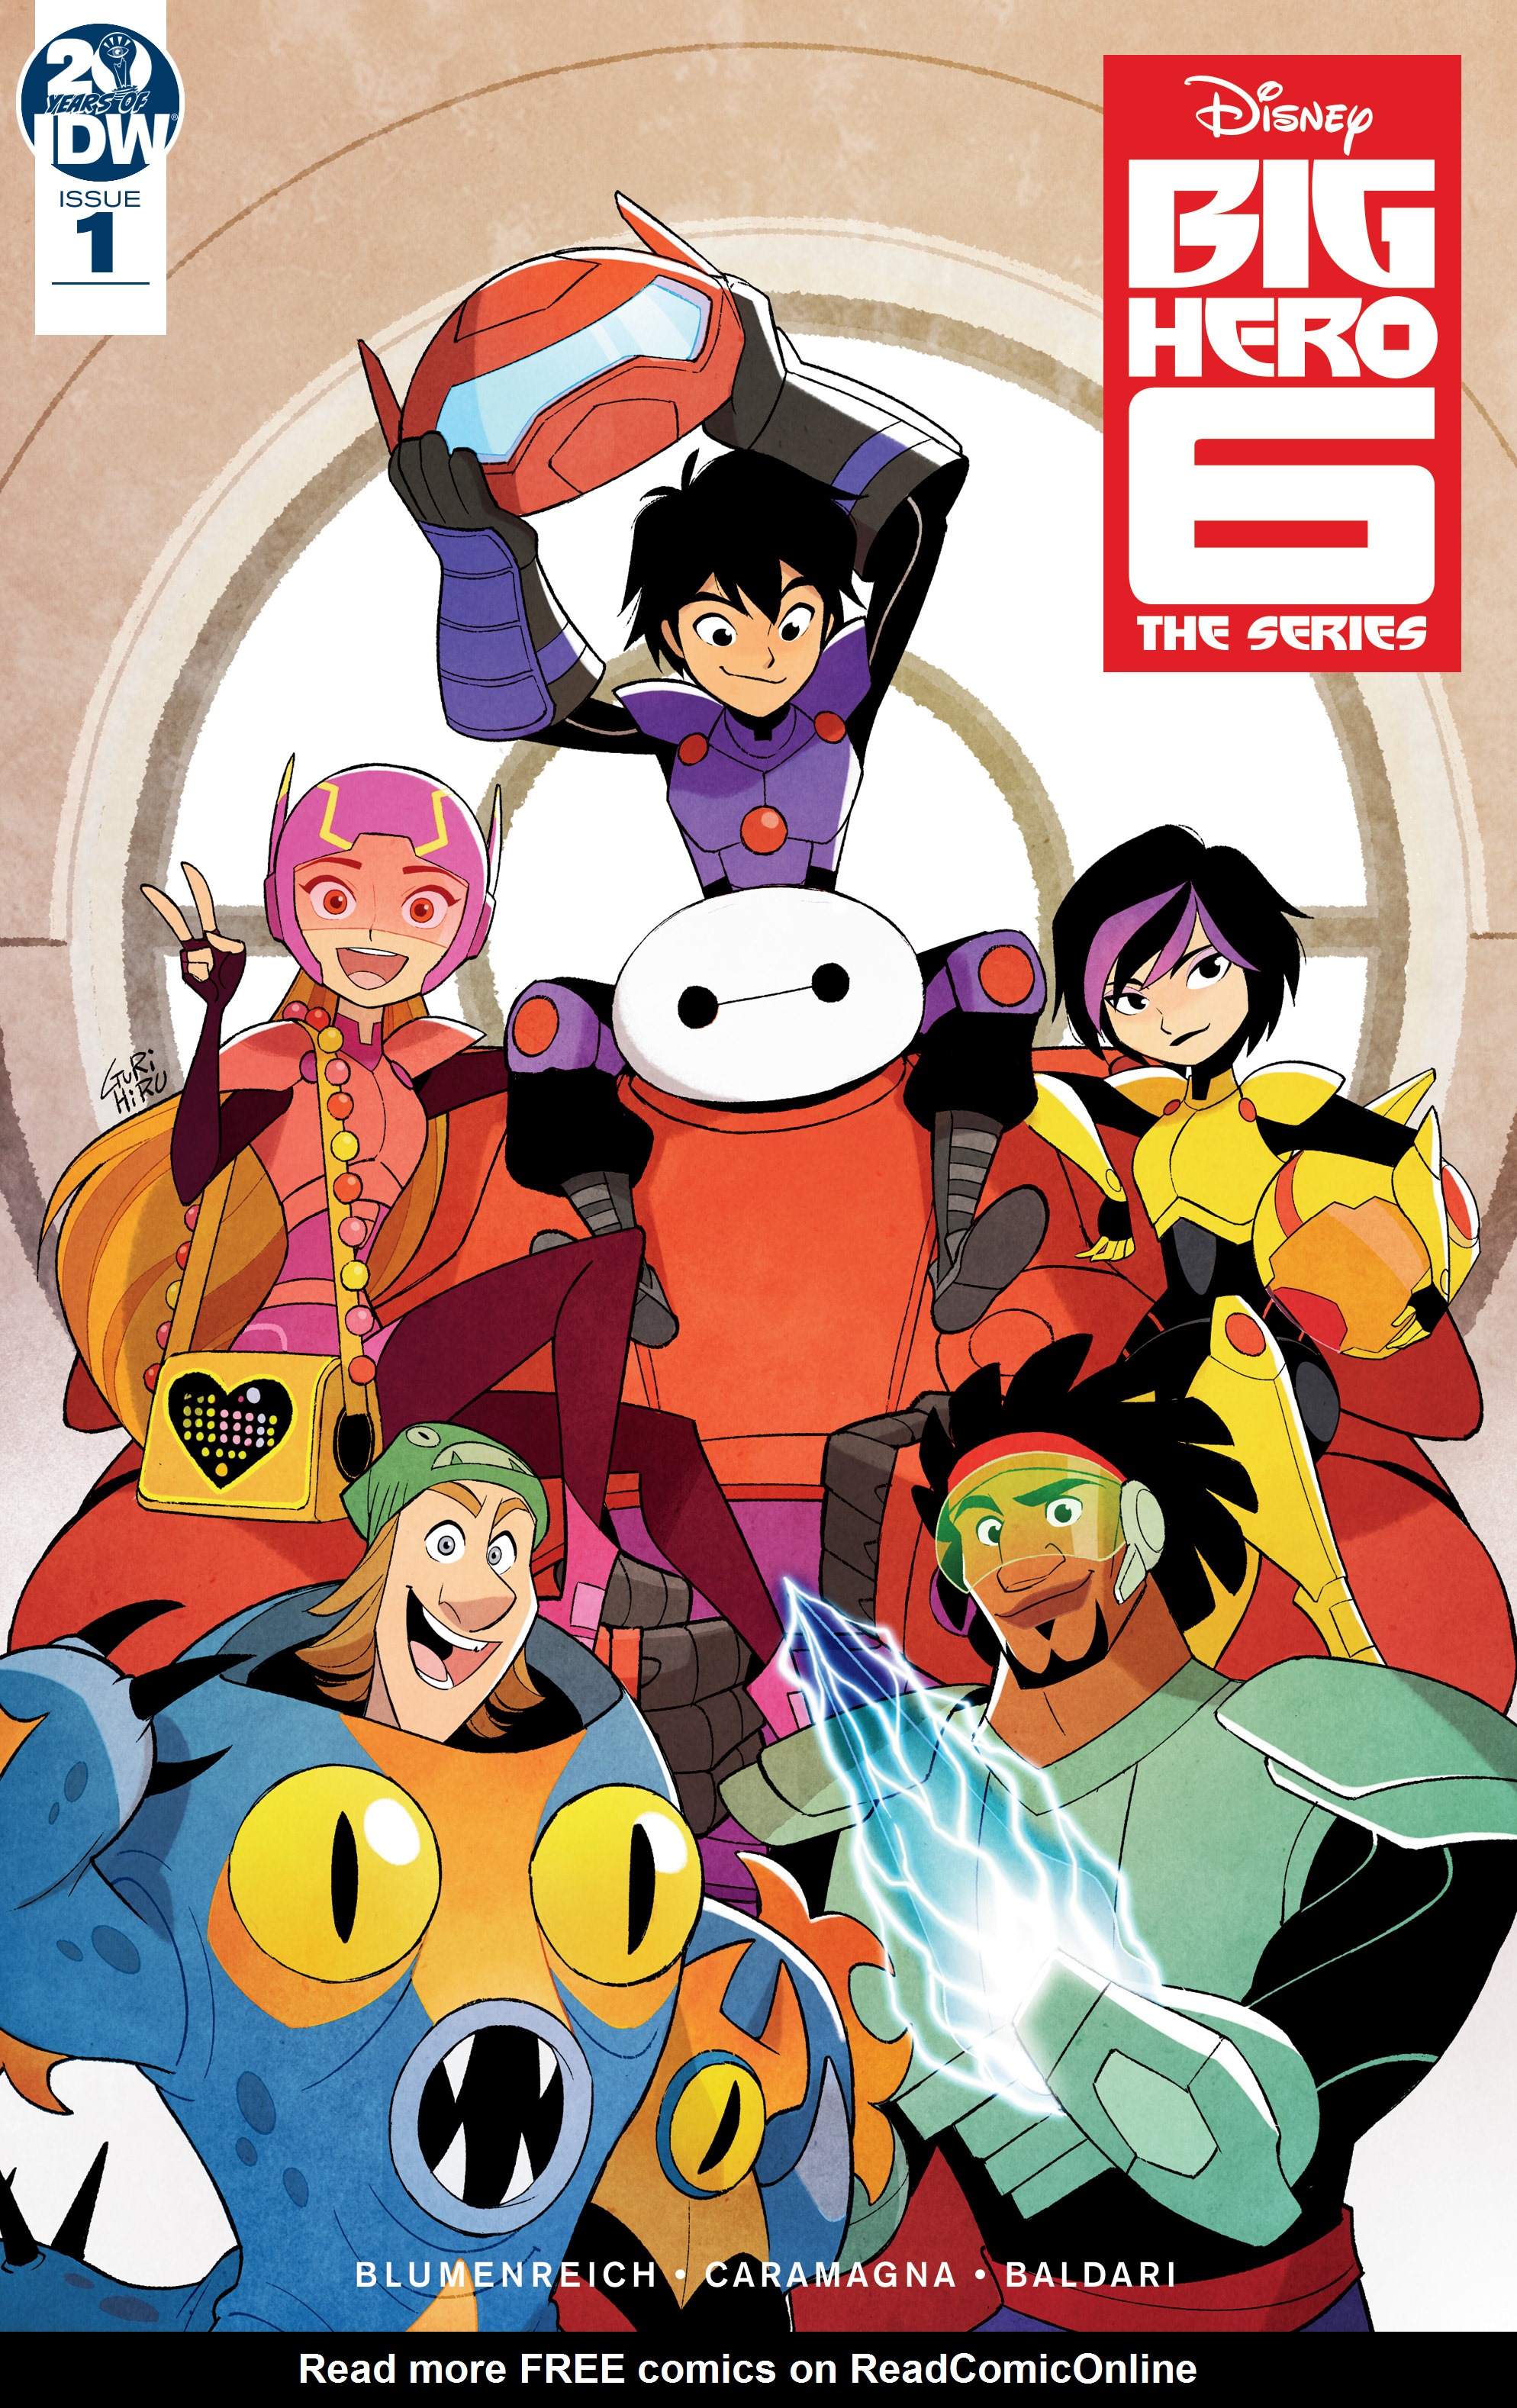 Big Hero 6 The Series Issue 1 | Read Big Hero 6 The Series Issue 1 comic  online in high quality. Read Full Comic online for free - Read comics  online in high quality .| READ COMIC ONLINE